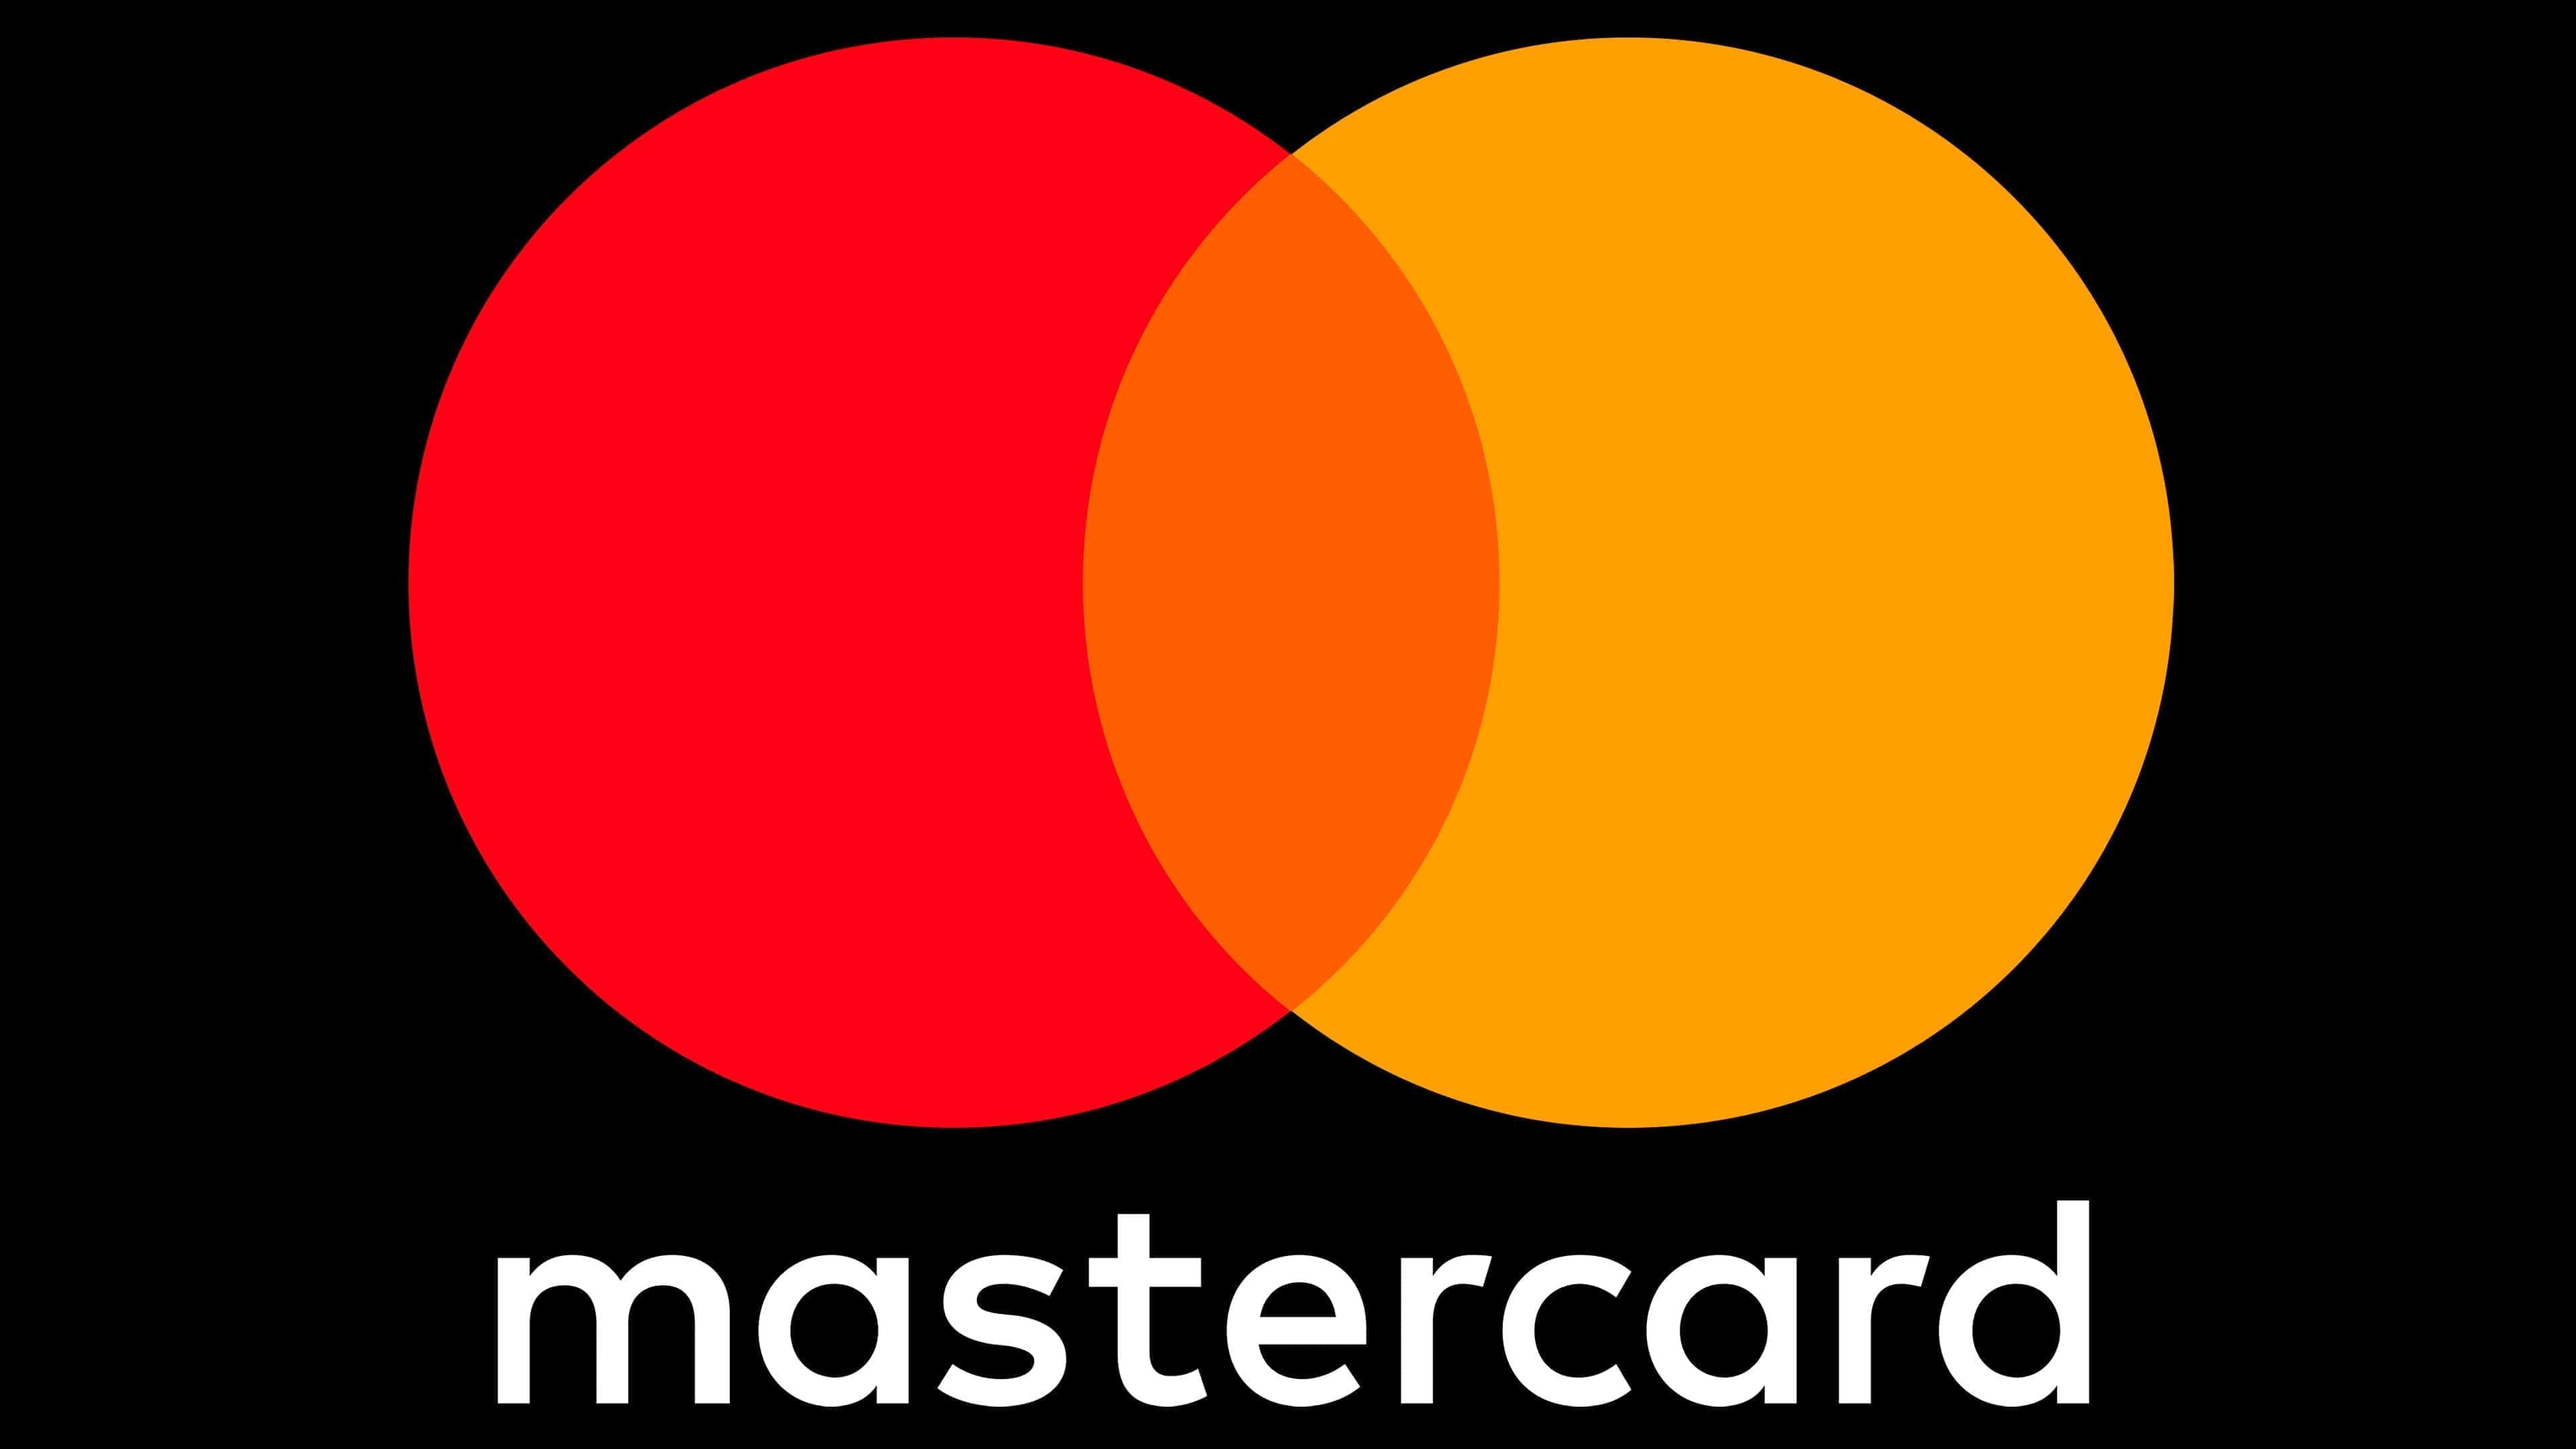 Mastercard: A cooperative owned by the more than 25,000 financial institutions that issue its branded cards. 3840x2160 4K Background.